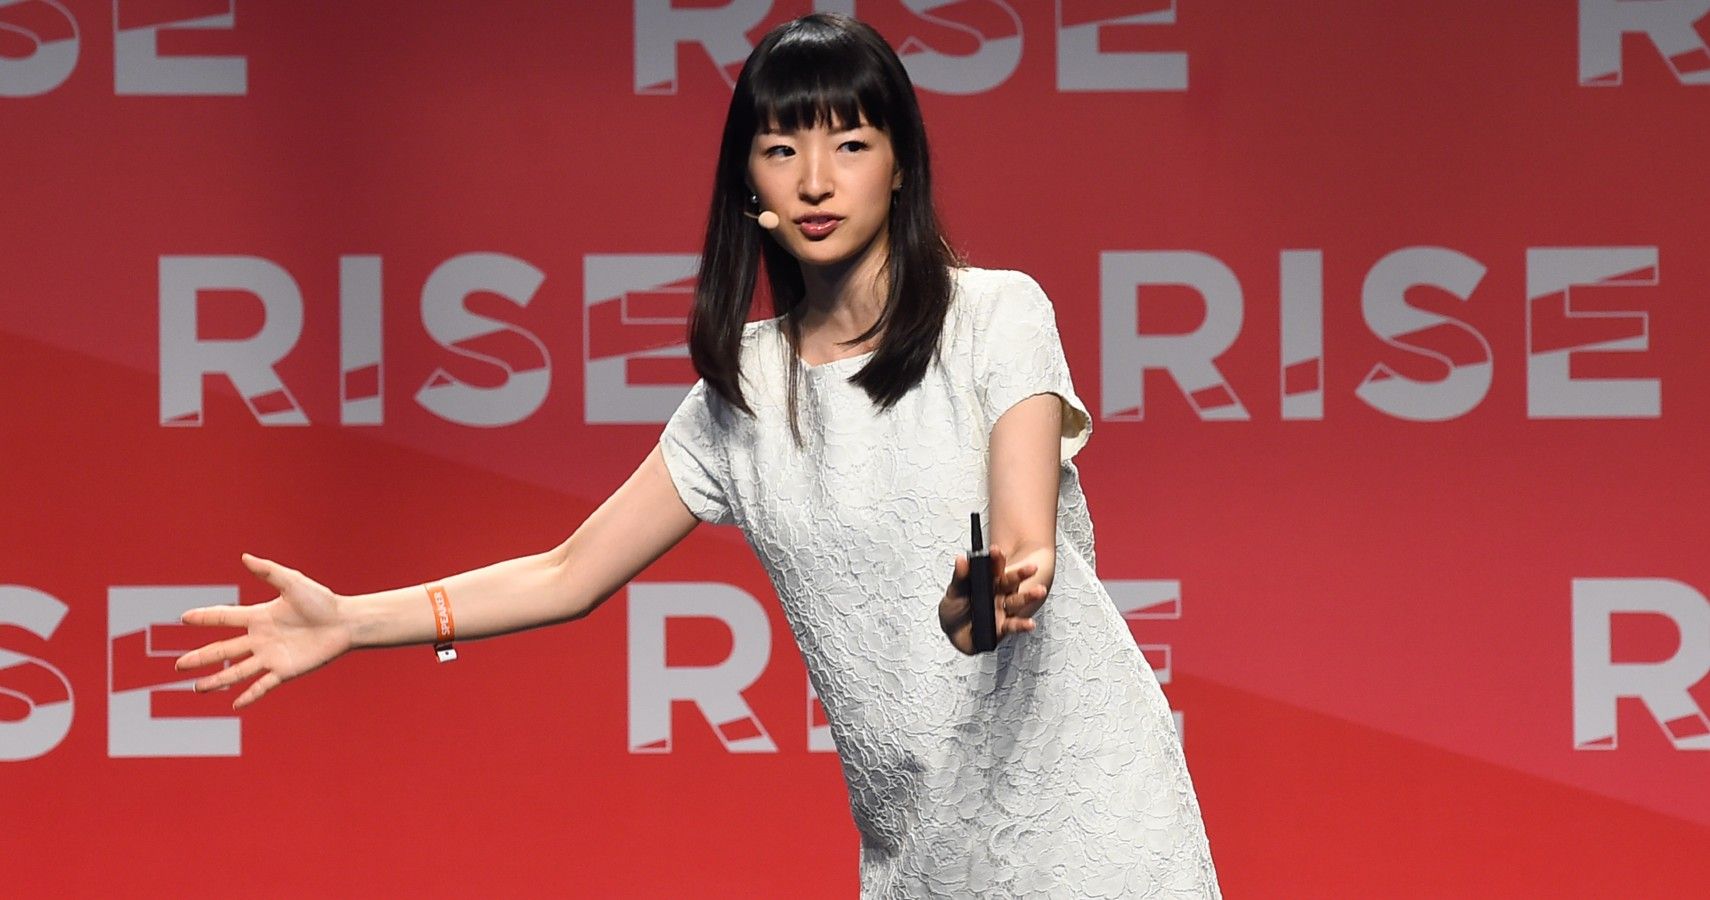 Marie Kondo Will Be “Tidying” A Lot With Another Child At Home